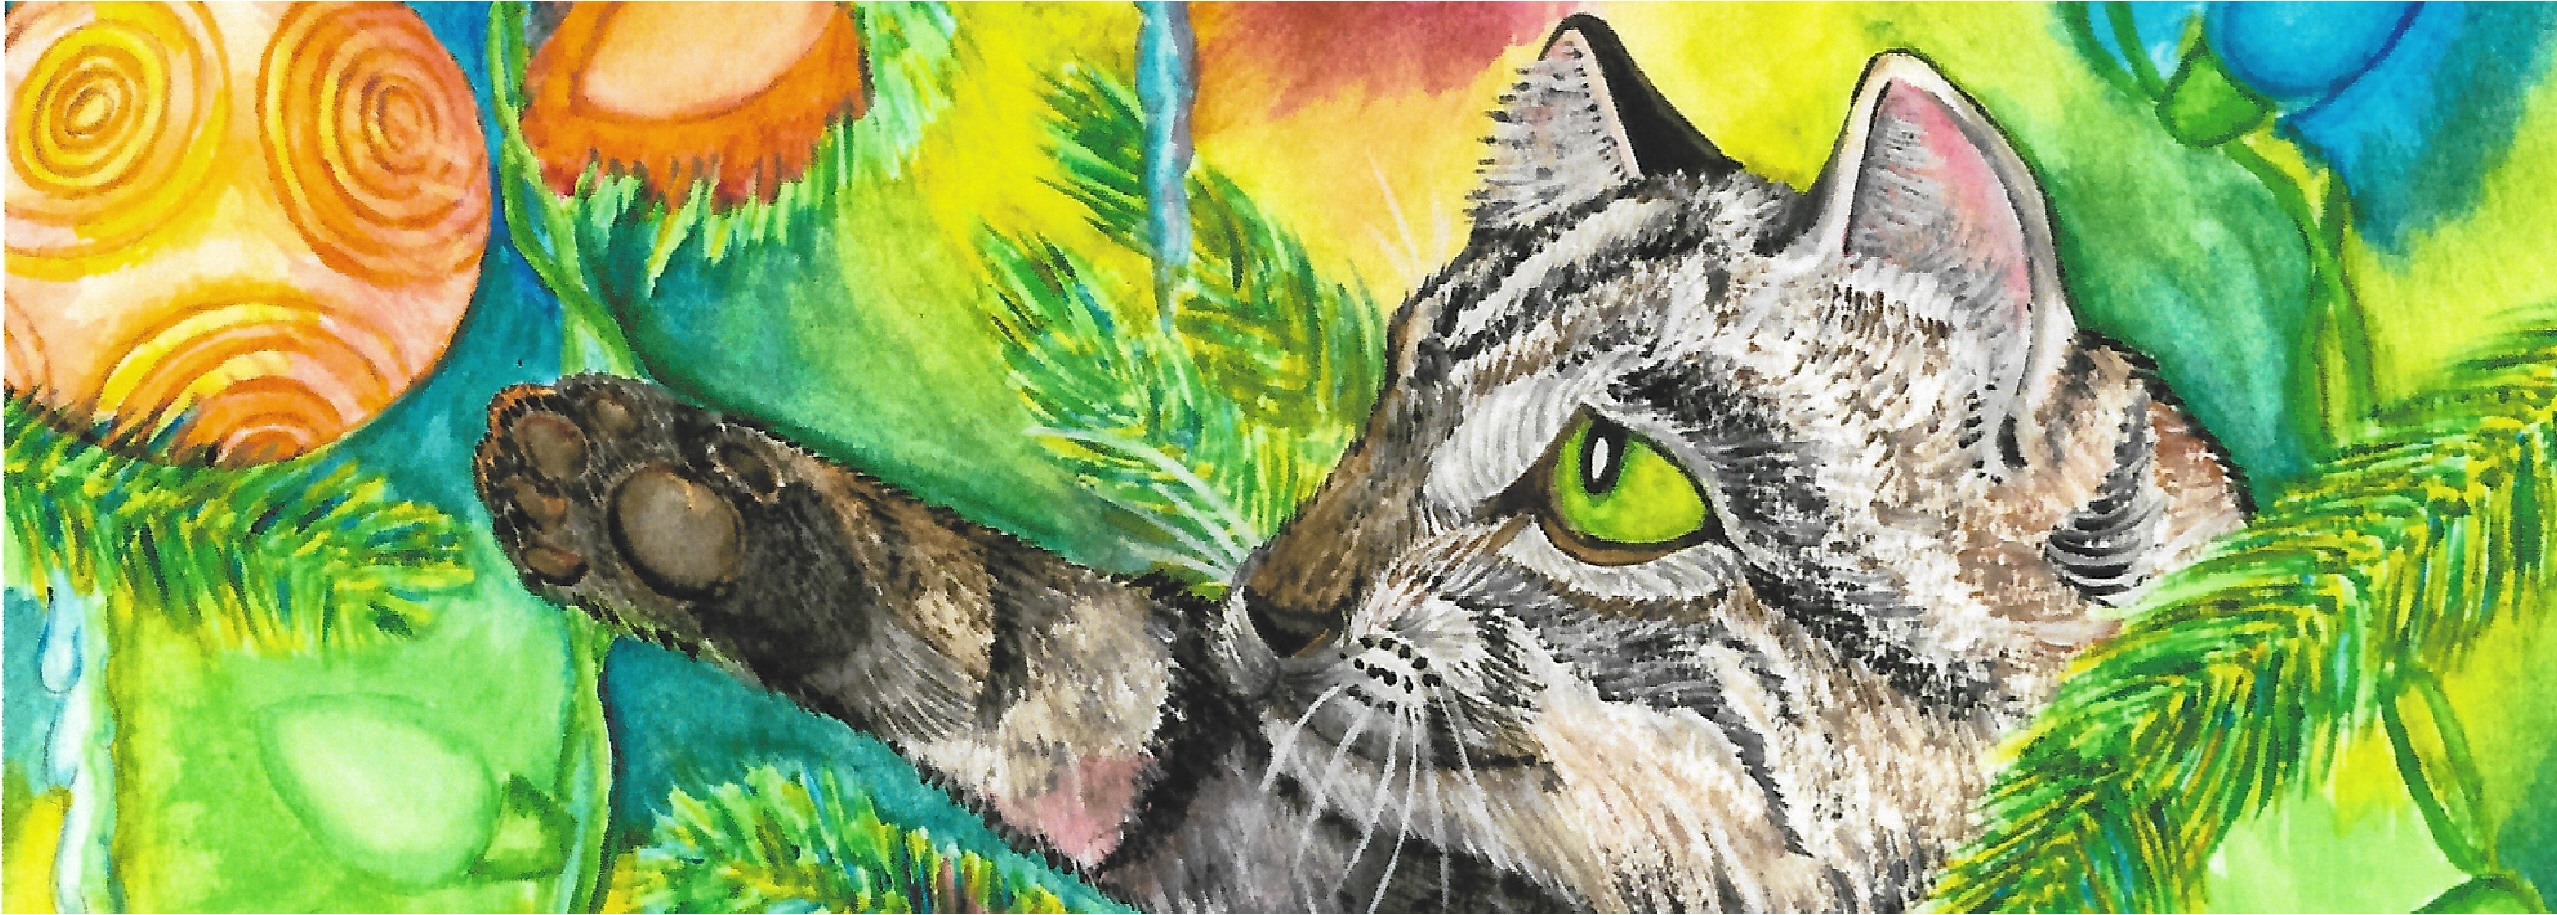 Christmas Cat 1 Watercolor Painting By The GYPSY